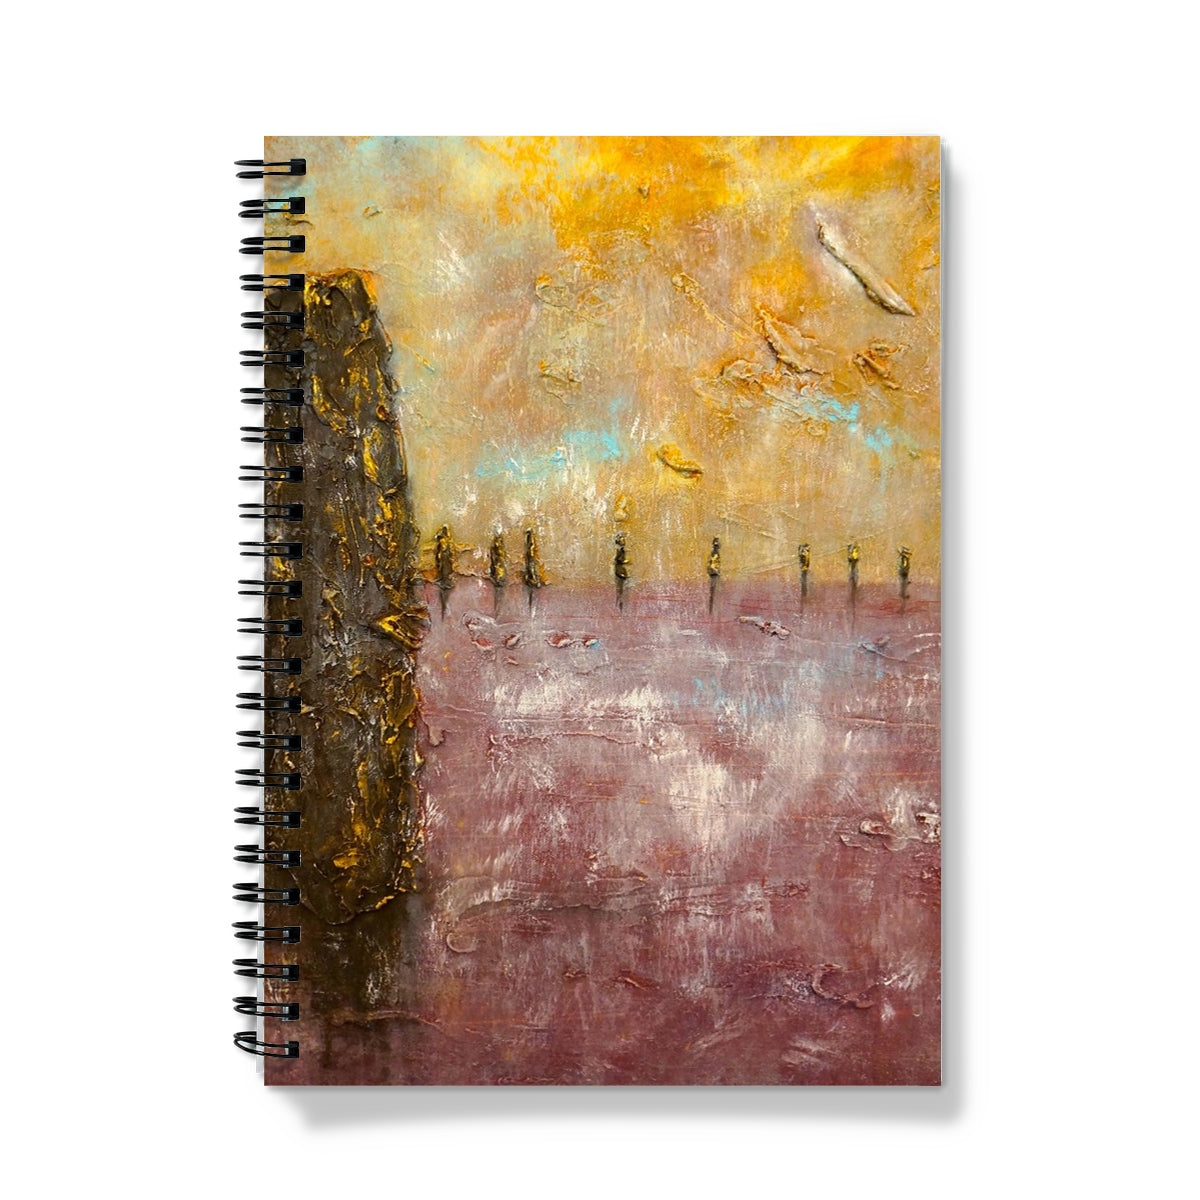 Brodgar Mist Orkney Art Gifts Notebook-Journals & Notebooks-Orkney Art Gallery-A4-Graph-Paintings, Prints, Homeware, Art Gifts From Scotland By Scottish Artist Kevin Hunter